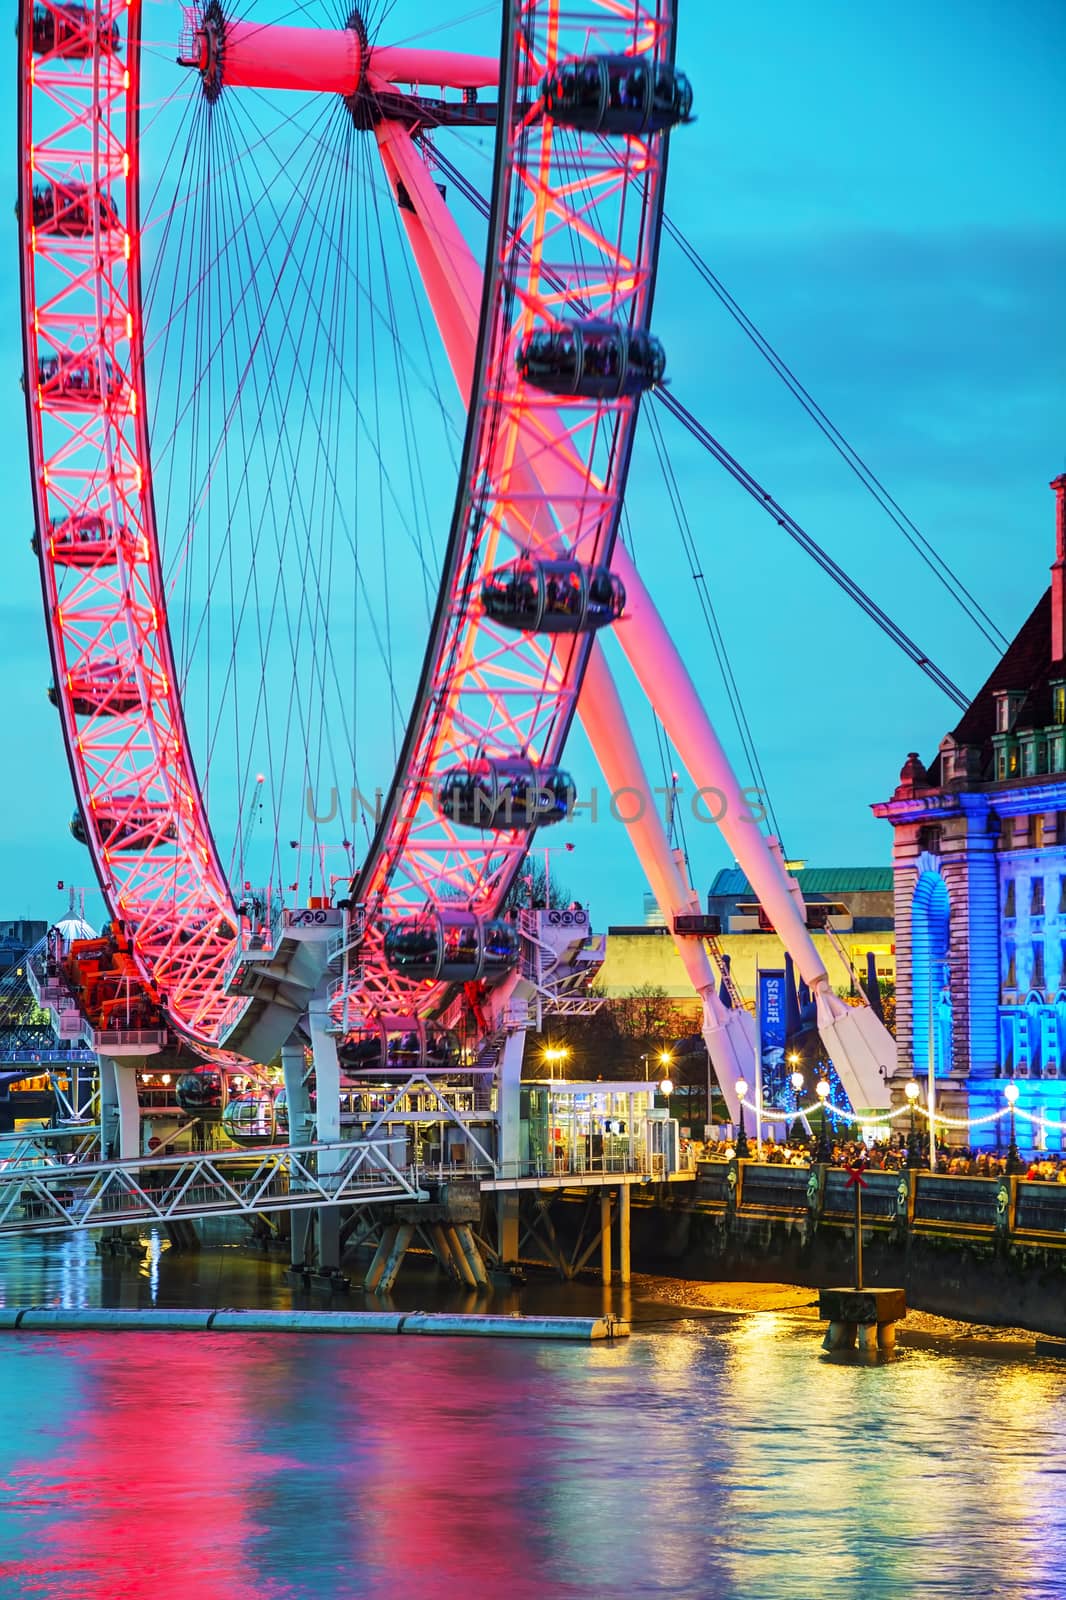 The London Eye Ferris wheel in the evening by AndreyKr